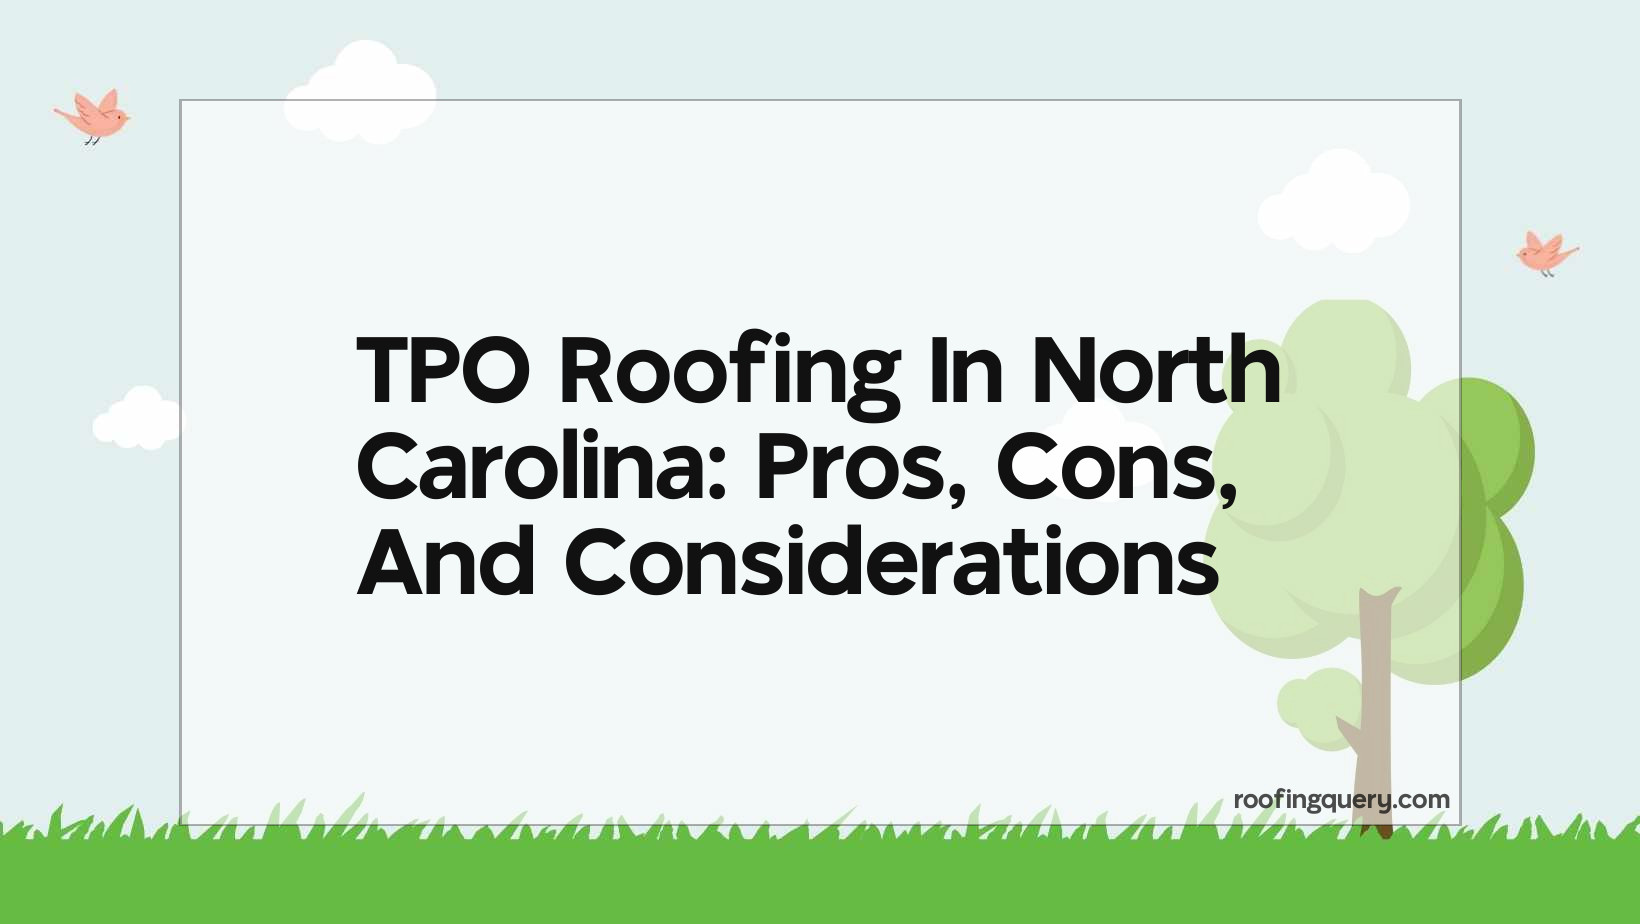 Tpo Roofing In North Carolina: Pros, Cons, And Considerations